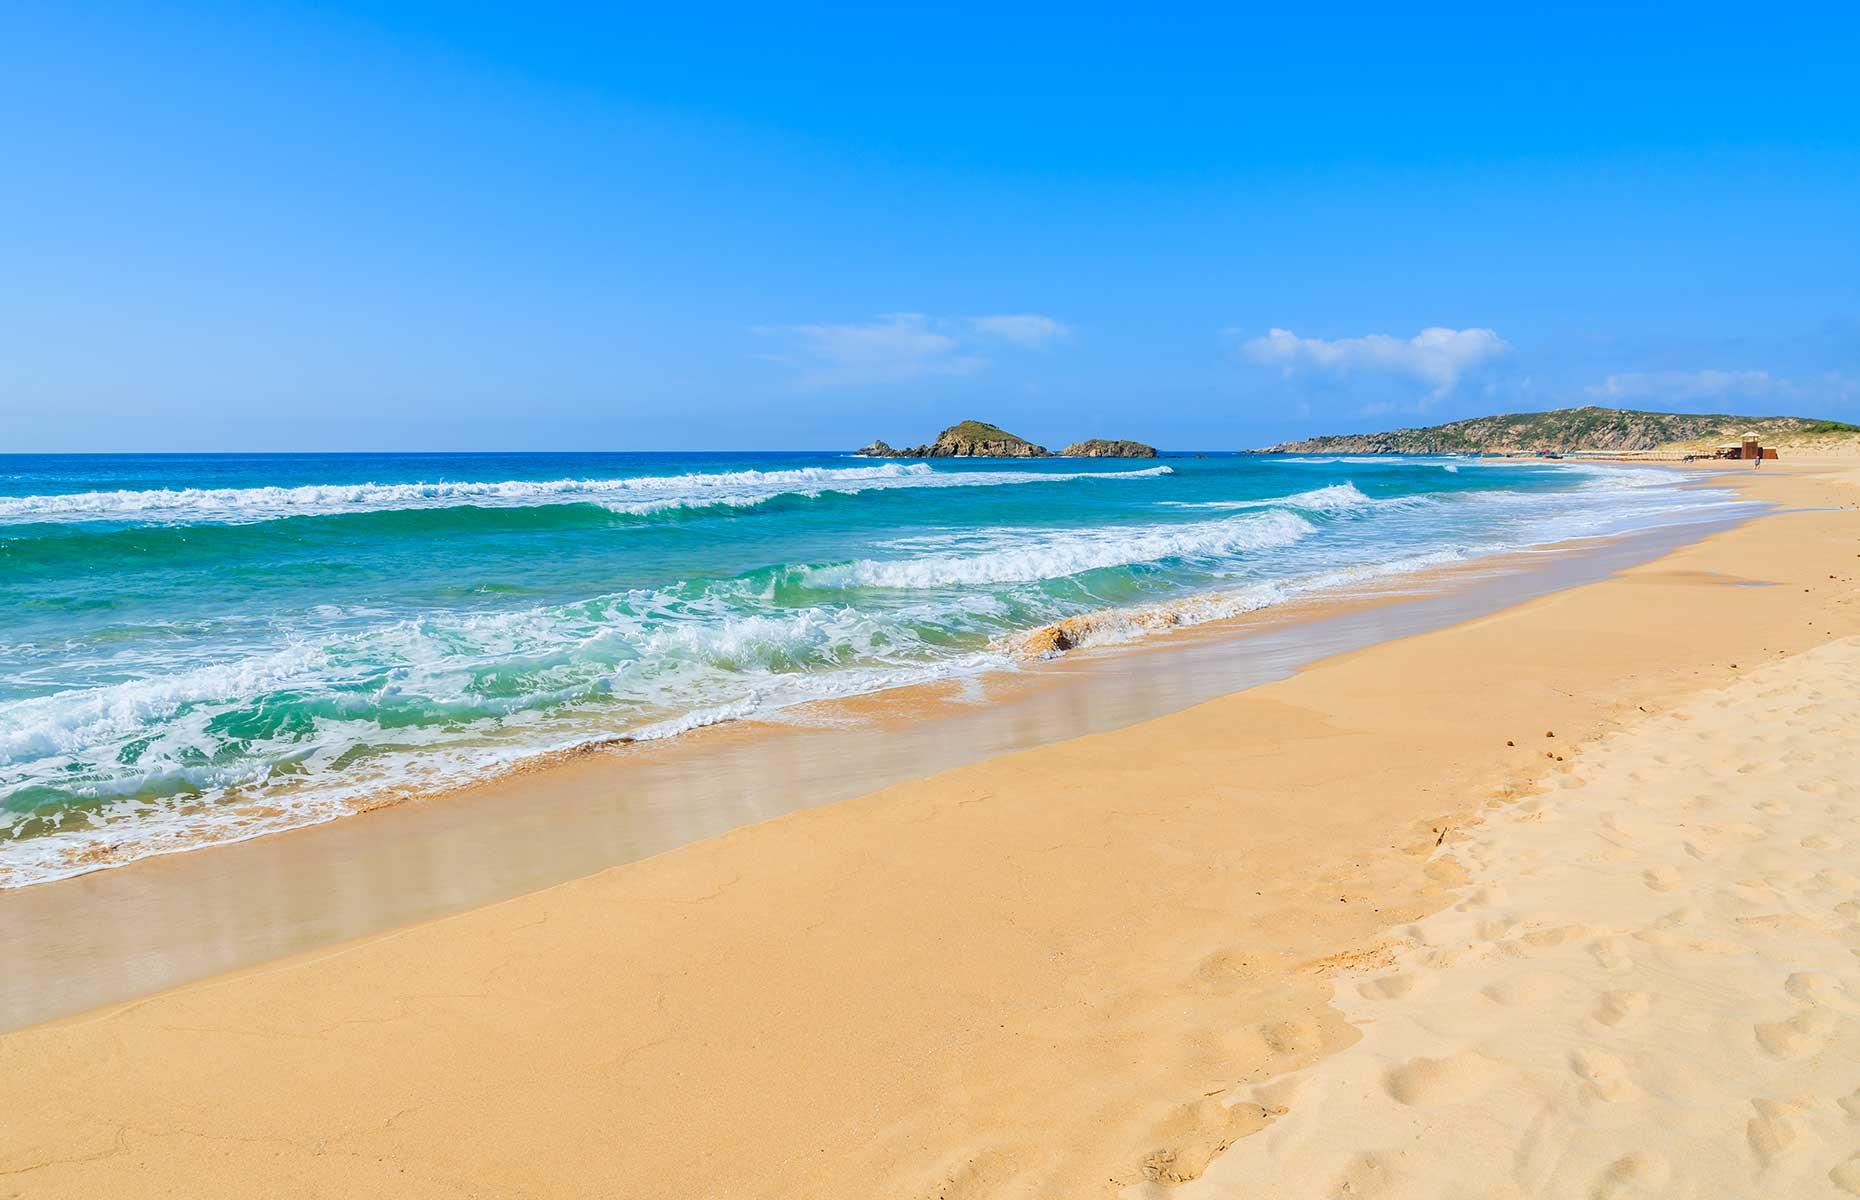 <p>Sand from your favorite beach may seem like a harmless travel keepsake, but it can be detrimental to local environments. Two French tourists narrowly avoided jail time after being caught with 90 pounds (40kg) of sand from Chia beach on the Italian island of Sardinia. The practice was <a href="https://www.theguardian.com/environment/2021/aug/13/sardinias-seasonal-crimewave-of-sand-thieves">made illegal in Sardinia</a> in 2017 but despite warnings (which are signposted across the beach), the tourists stashed the sand into 14 large plastic bottles, stowed away in the boot of their car. </p>